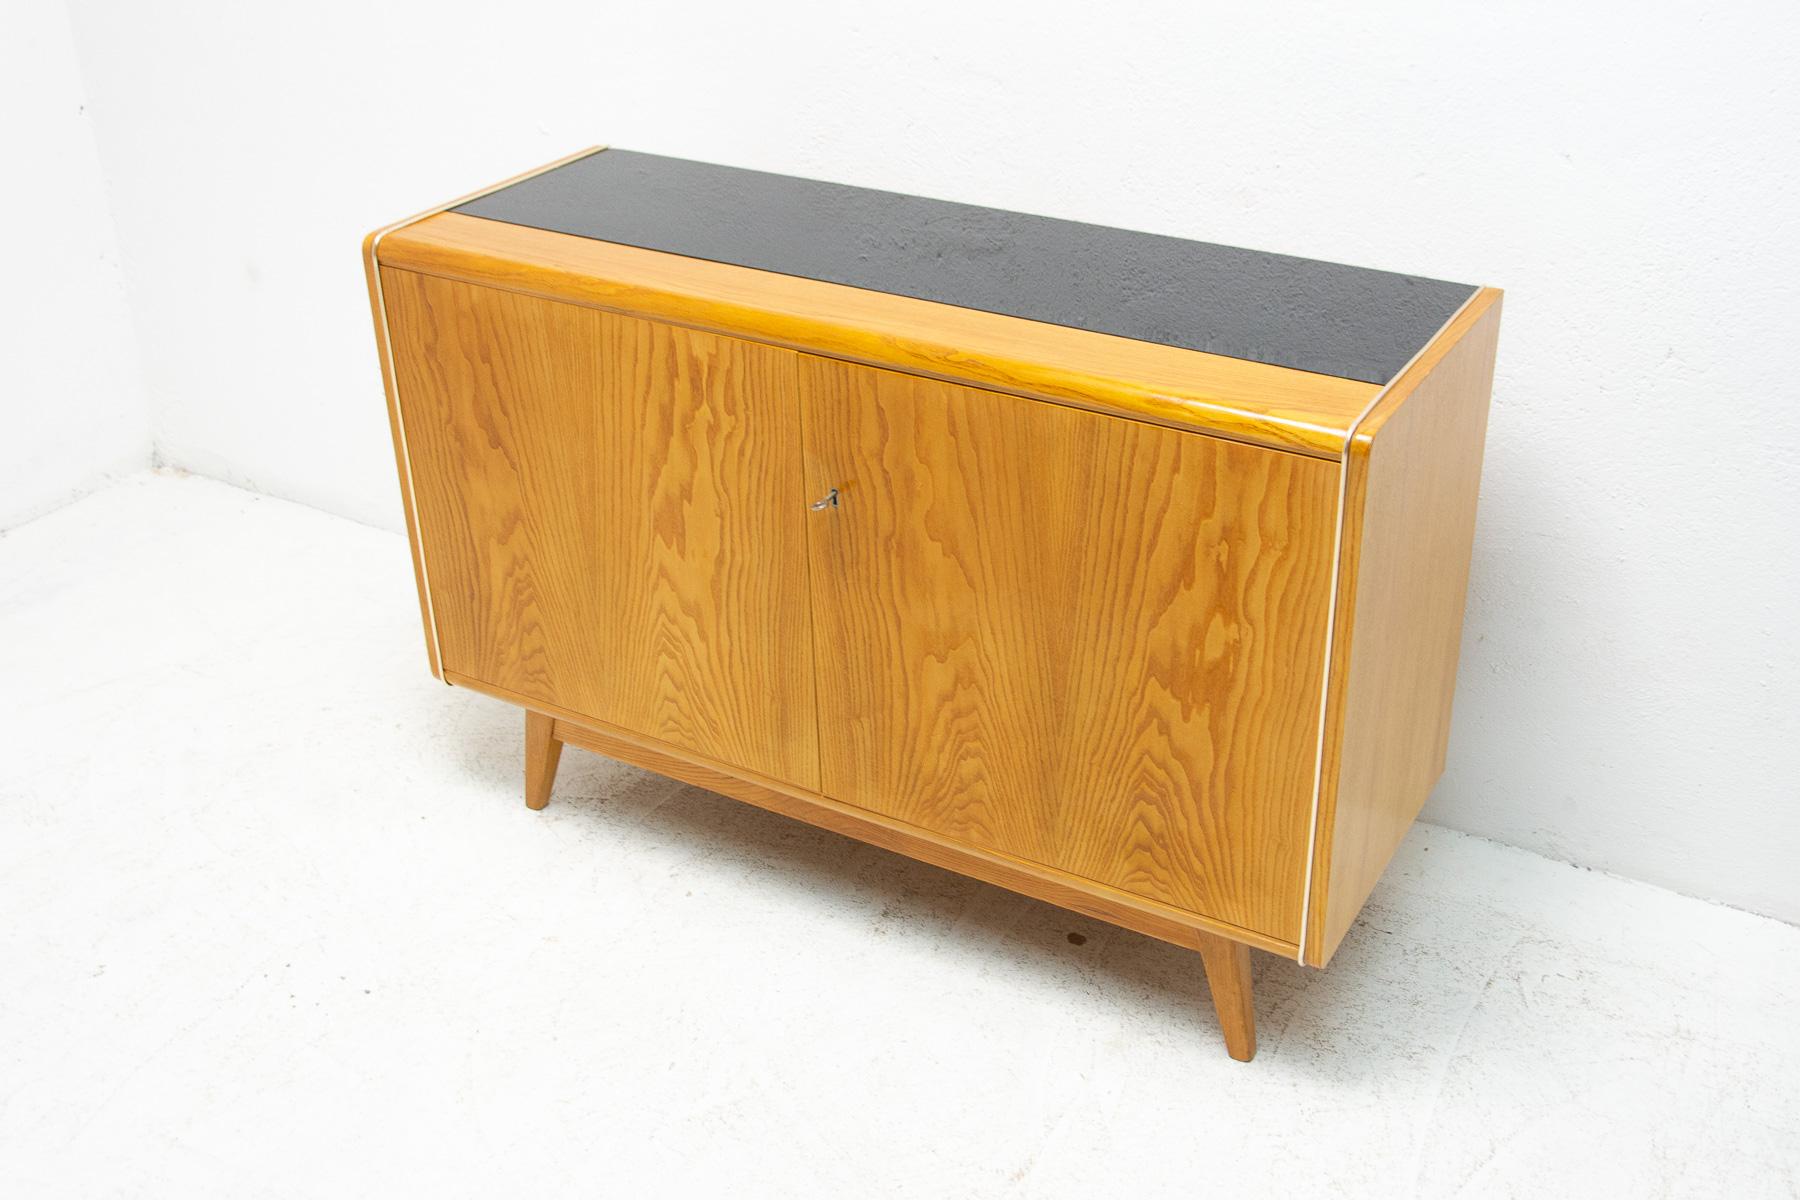 This mid century sideboard was designed by Hubert Nepožitek & Bohumil Landsman for Jitona company in the 1960´s. Material: beech wood, opaxite glass. In very good vintage condition, showing slight signs if age and using.